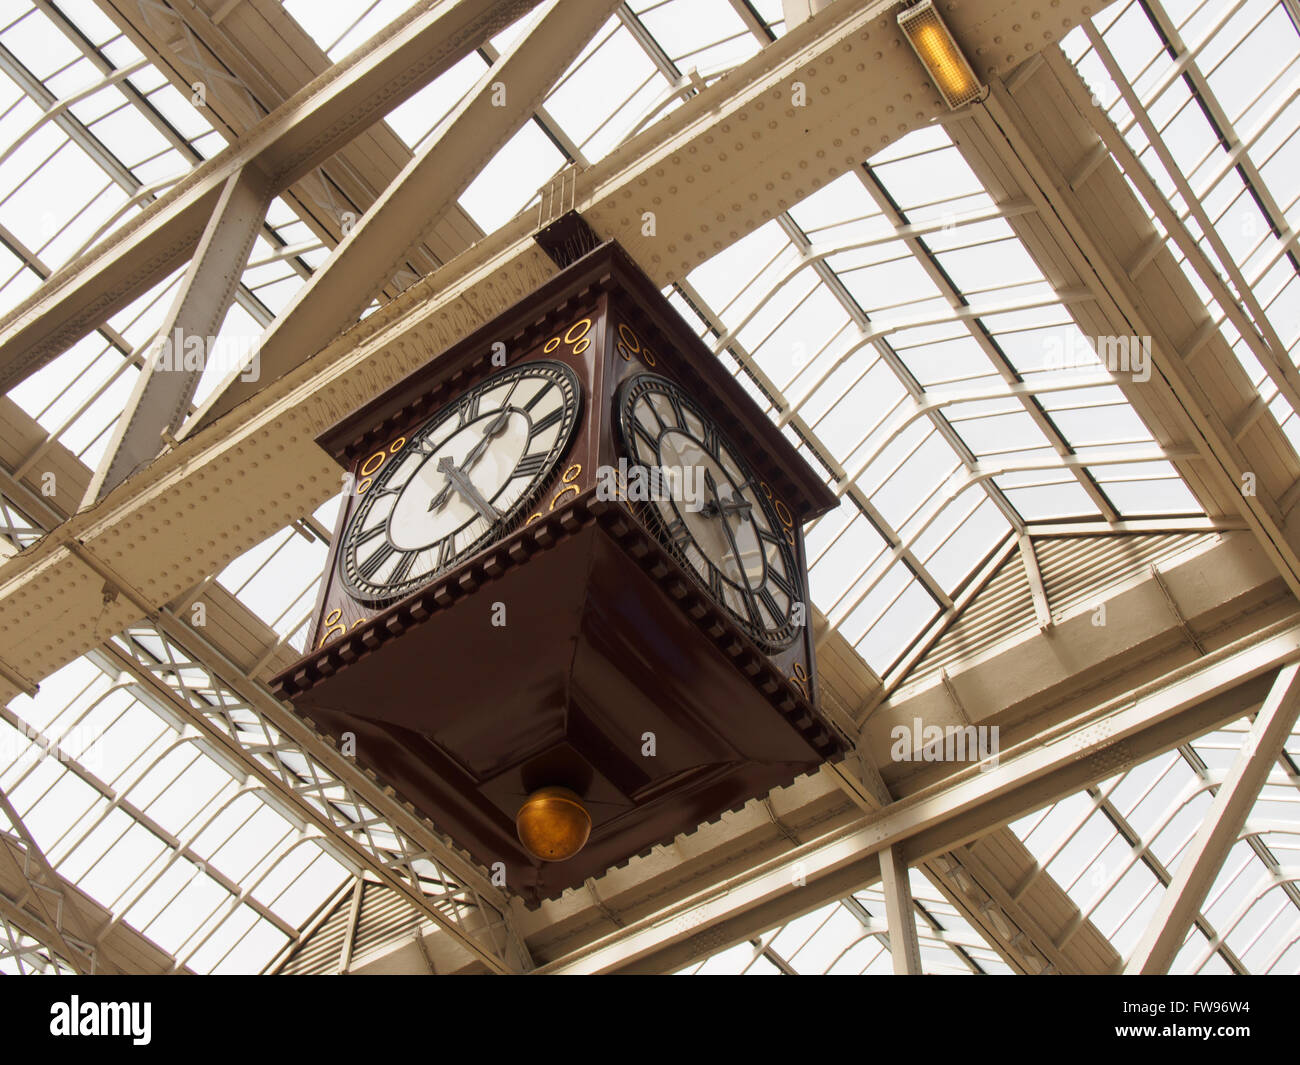 Overhead clock in Central Station, Glasgow, Scotland. Stock Photo